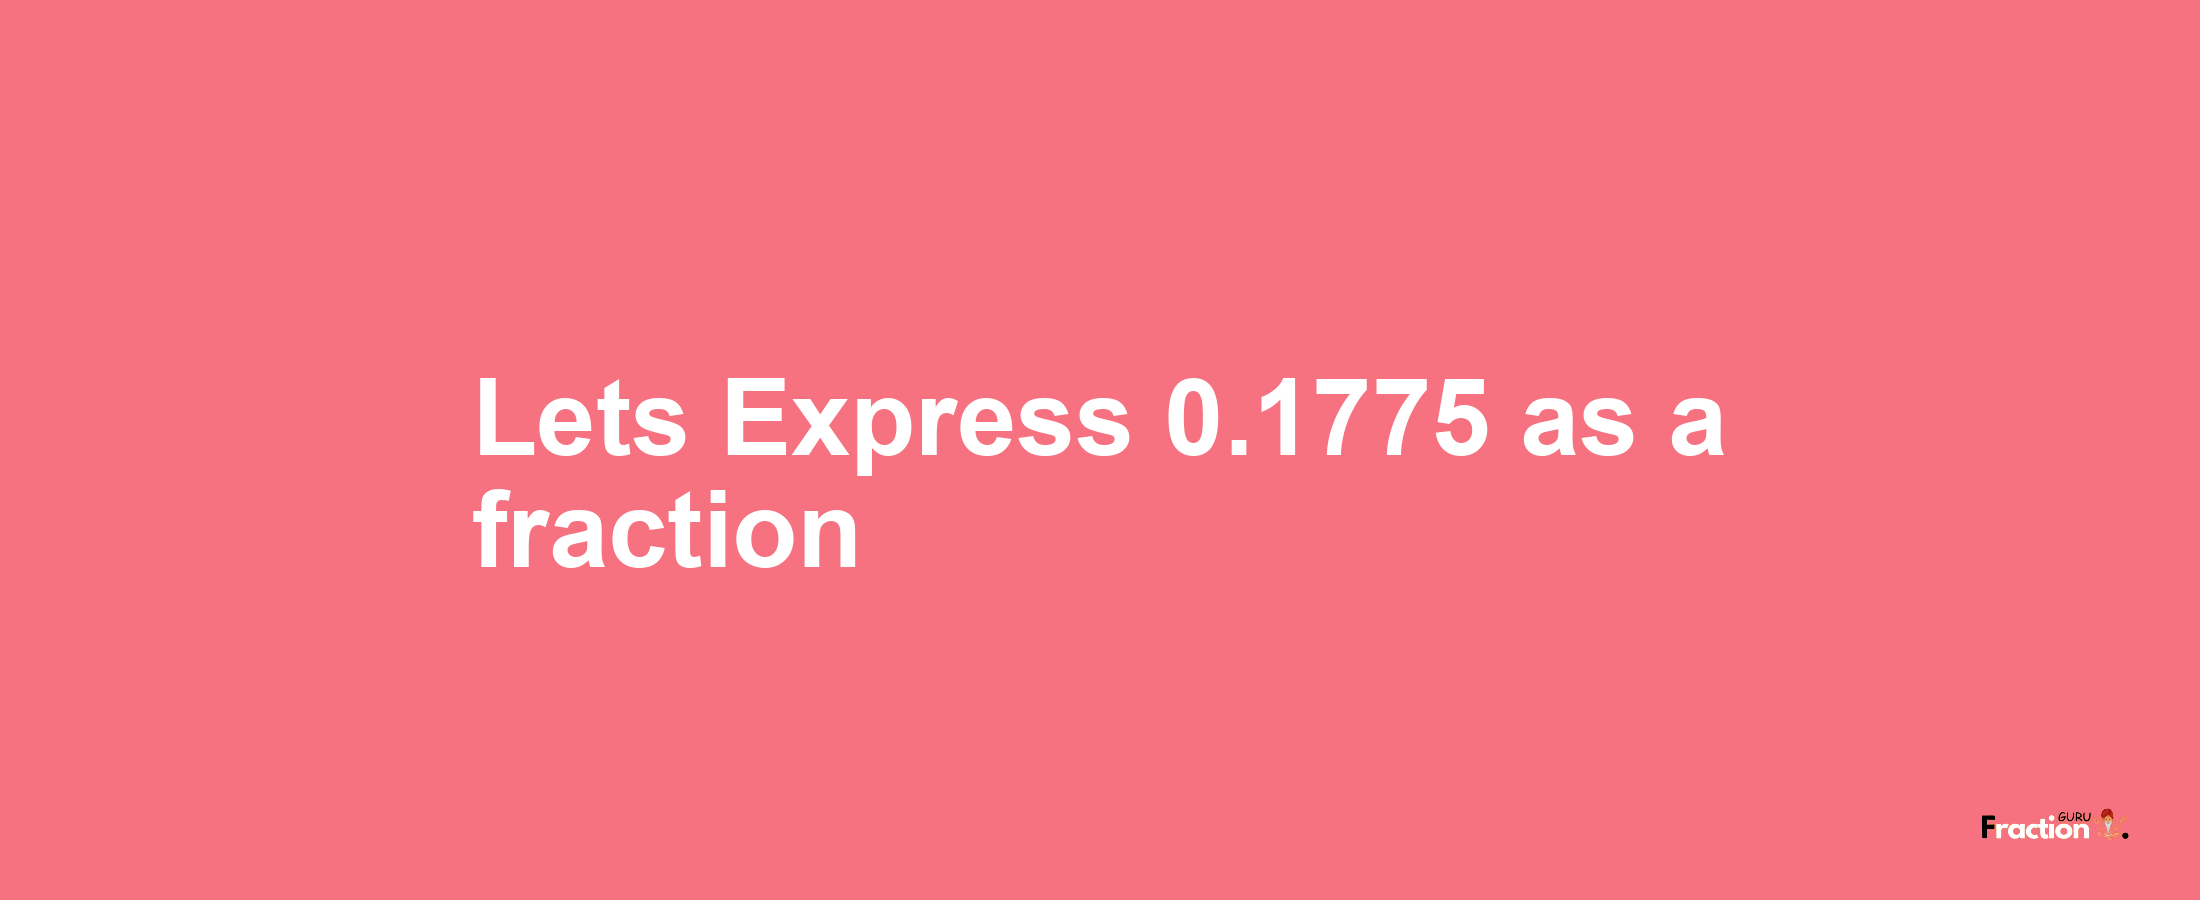 Lets Express 0.1775 as afraction